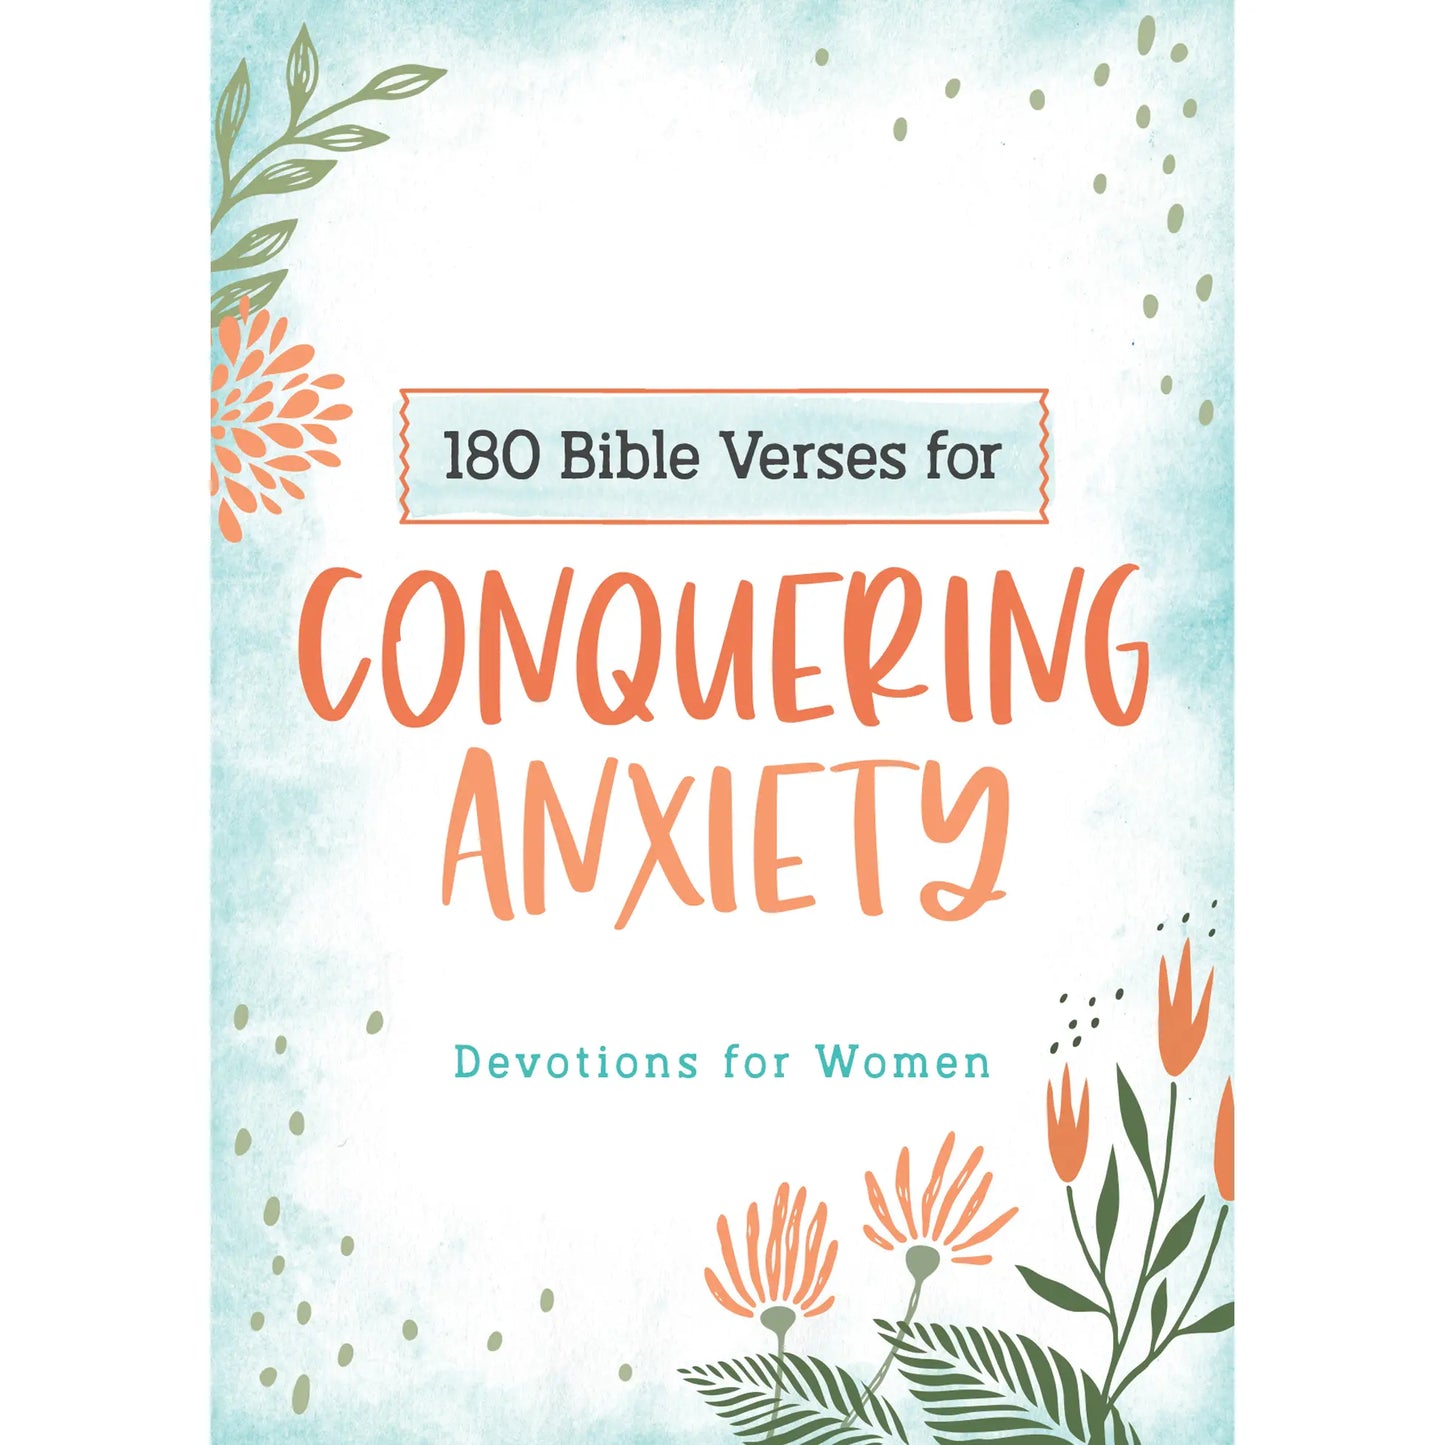 180 Bible Verses for Conquering Anxiety